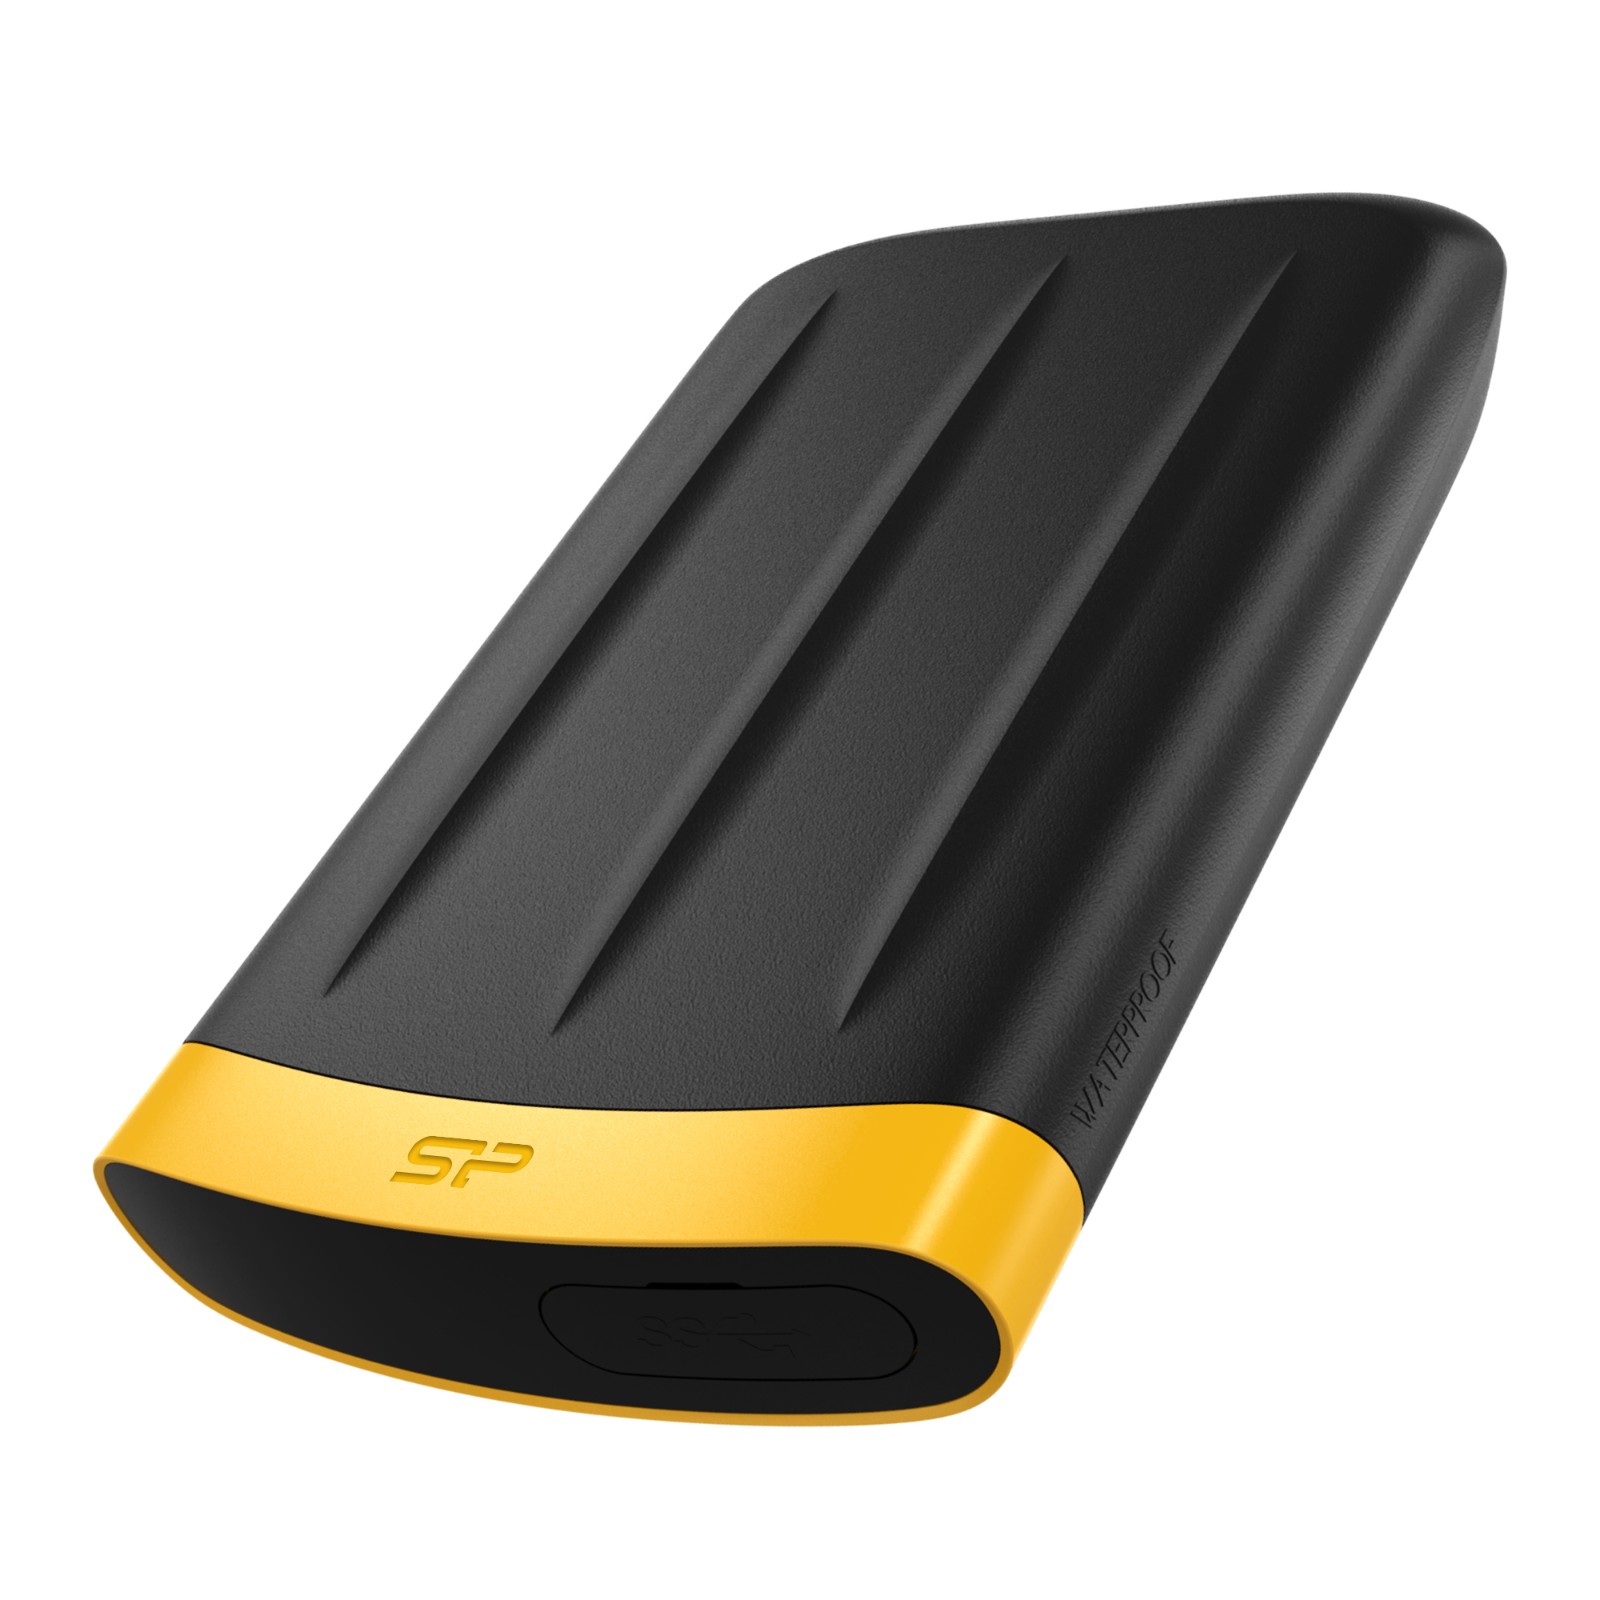 Silicon Power 1TB A65 Shock, Dust, Waterproof, Data Security Portable External Hard Drive USB 3.0 For PC,MAC,XBOX,PS4